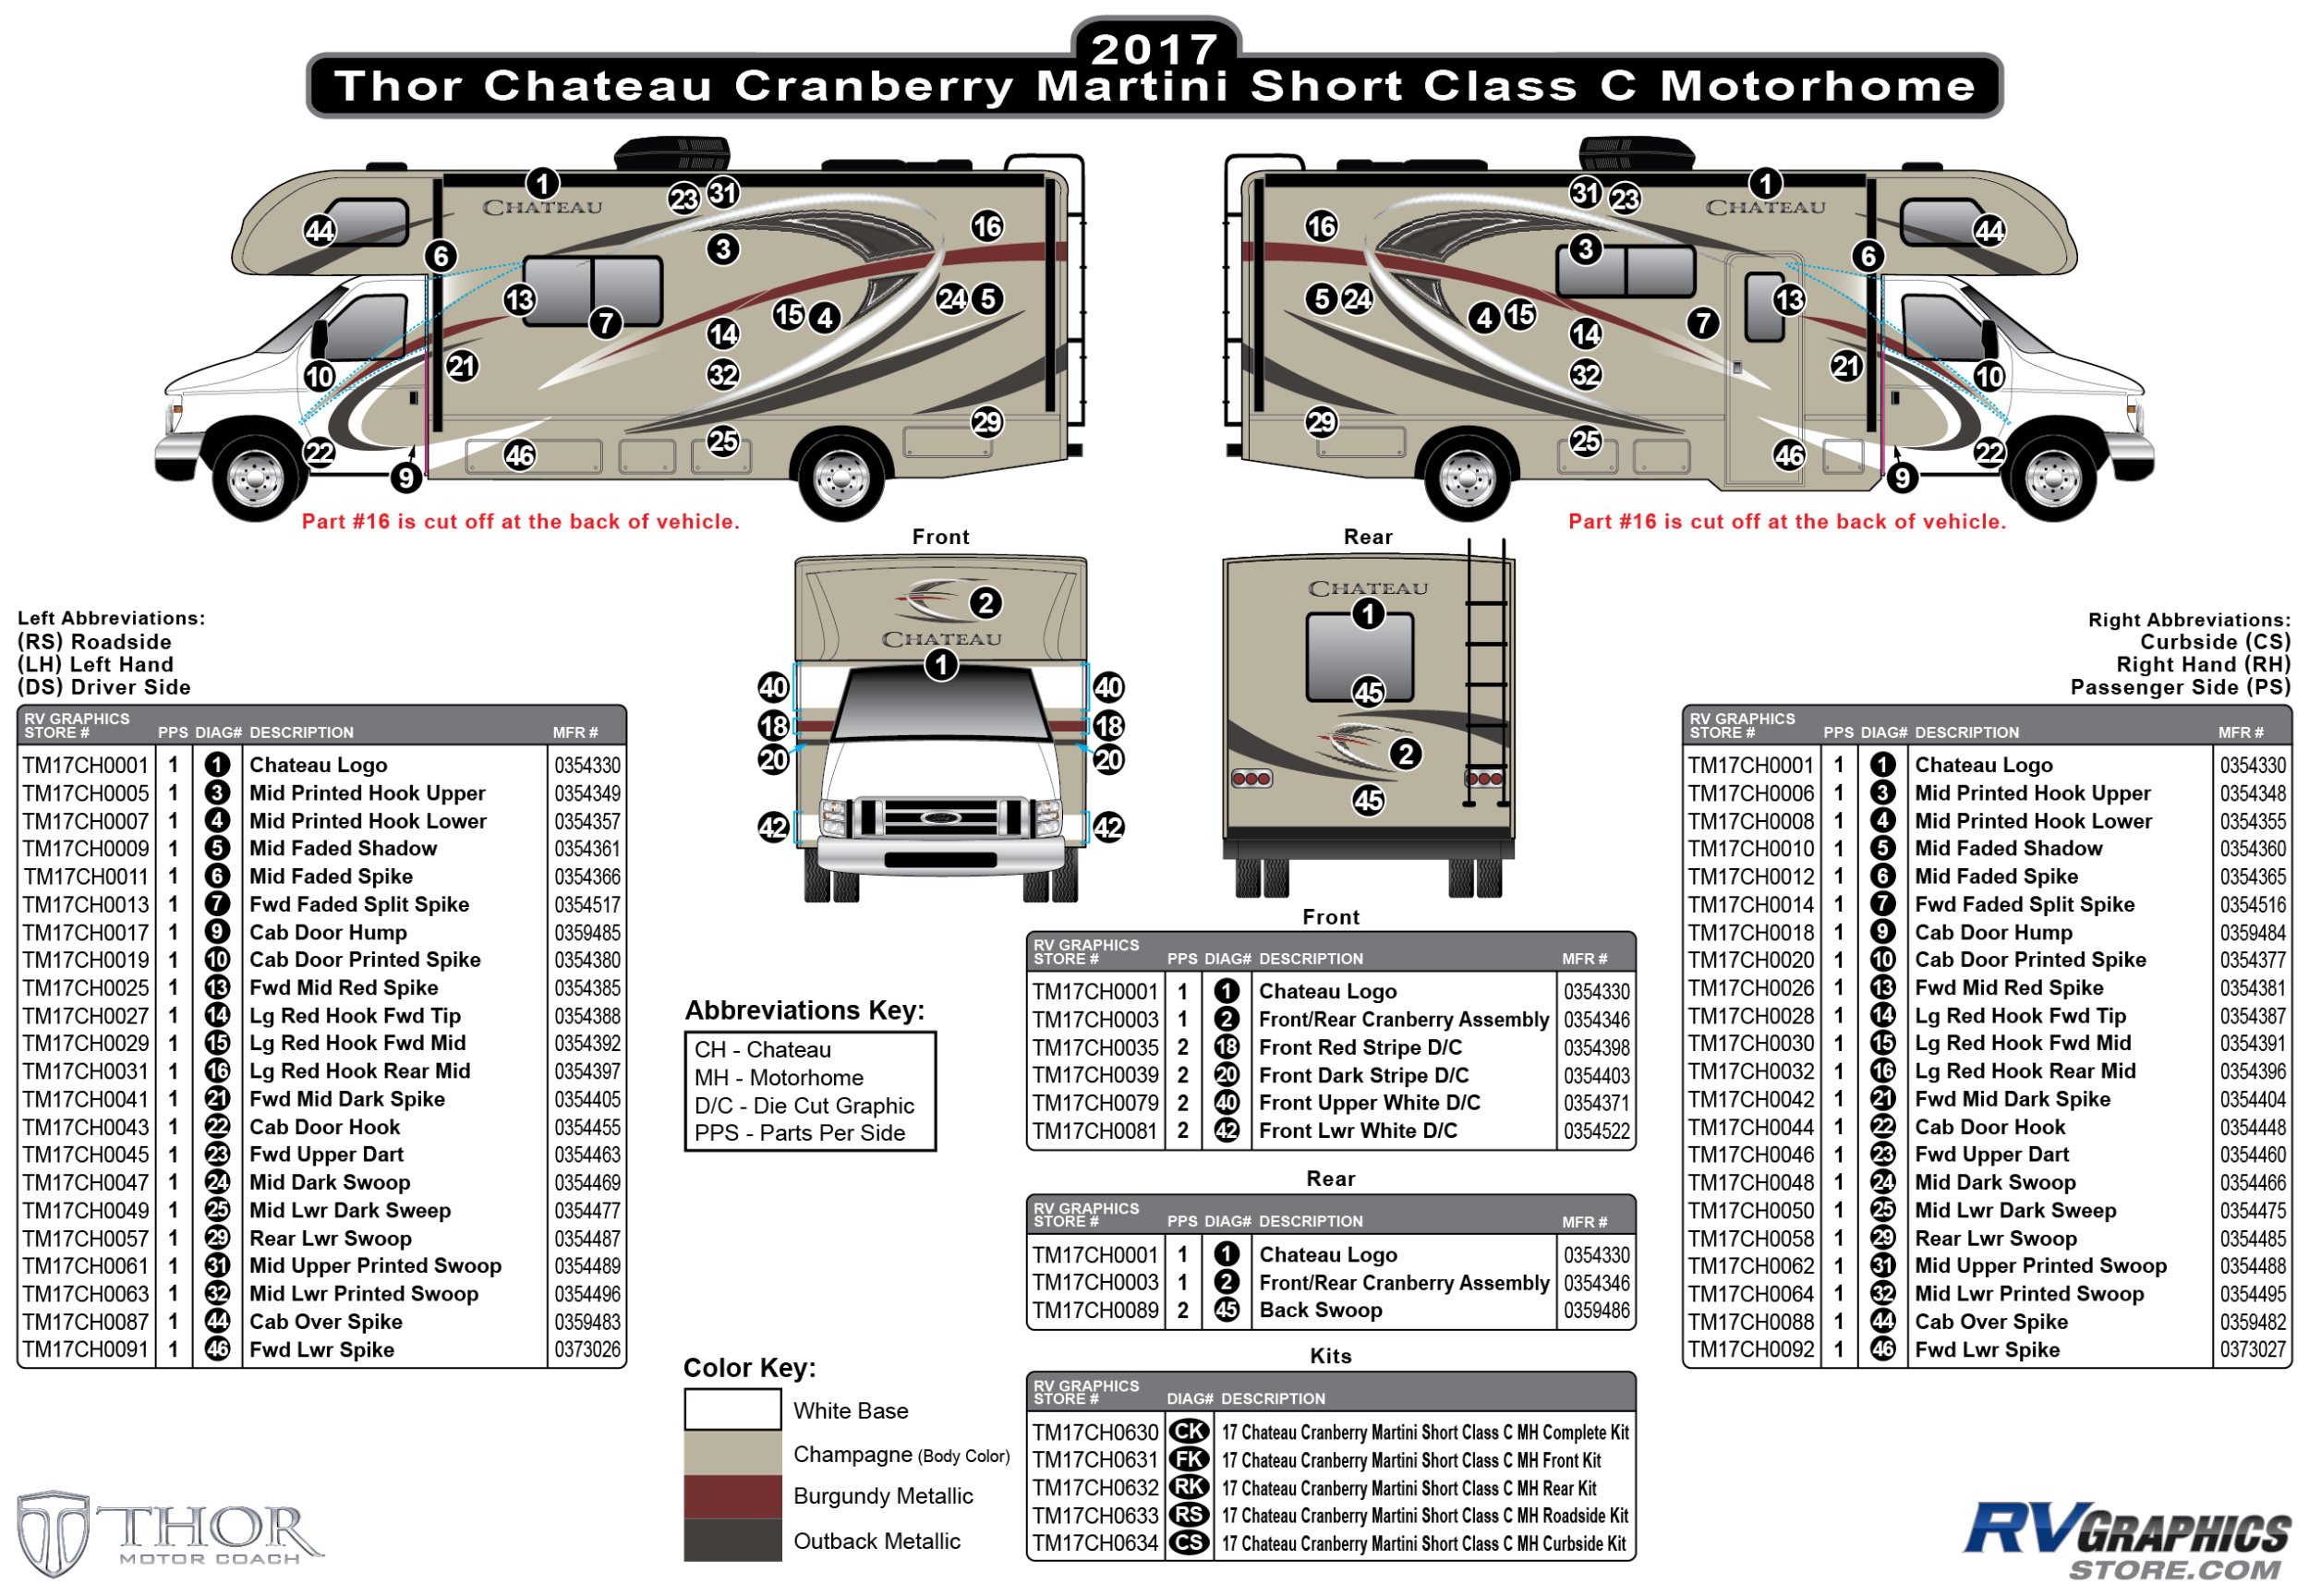 Chateau - 2017-2018 Chateau MH-Motorhome HD Max Cranberry Version-Short Model 22'-26'